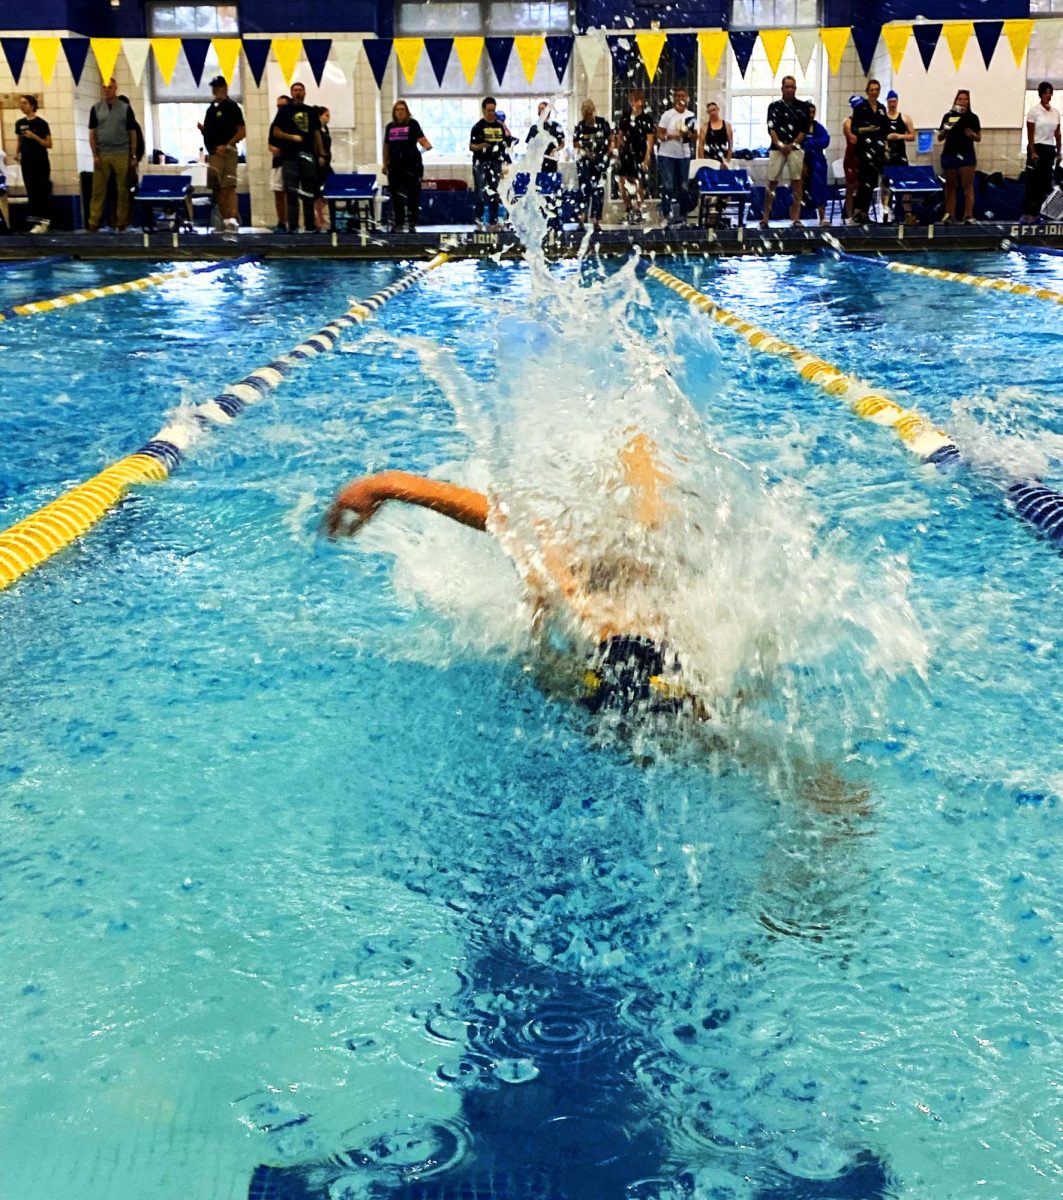 Ahead of the competition, Whitney Handwork ’26 is swimming in the 50-meter freestyle race.  After winning the MAC Red championship, she is shifting her focus to preparing for states.